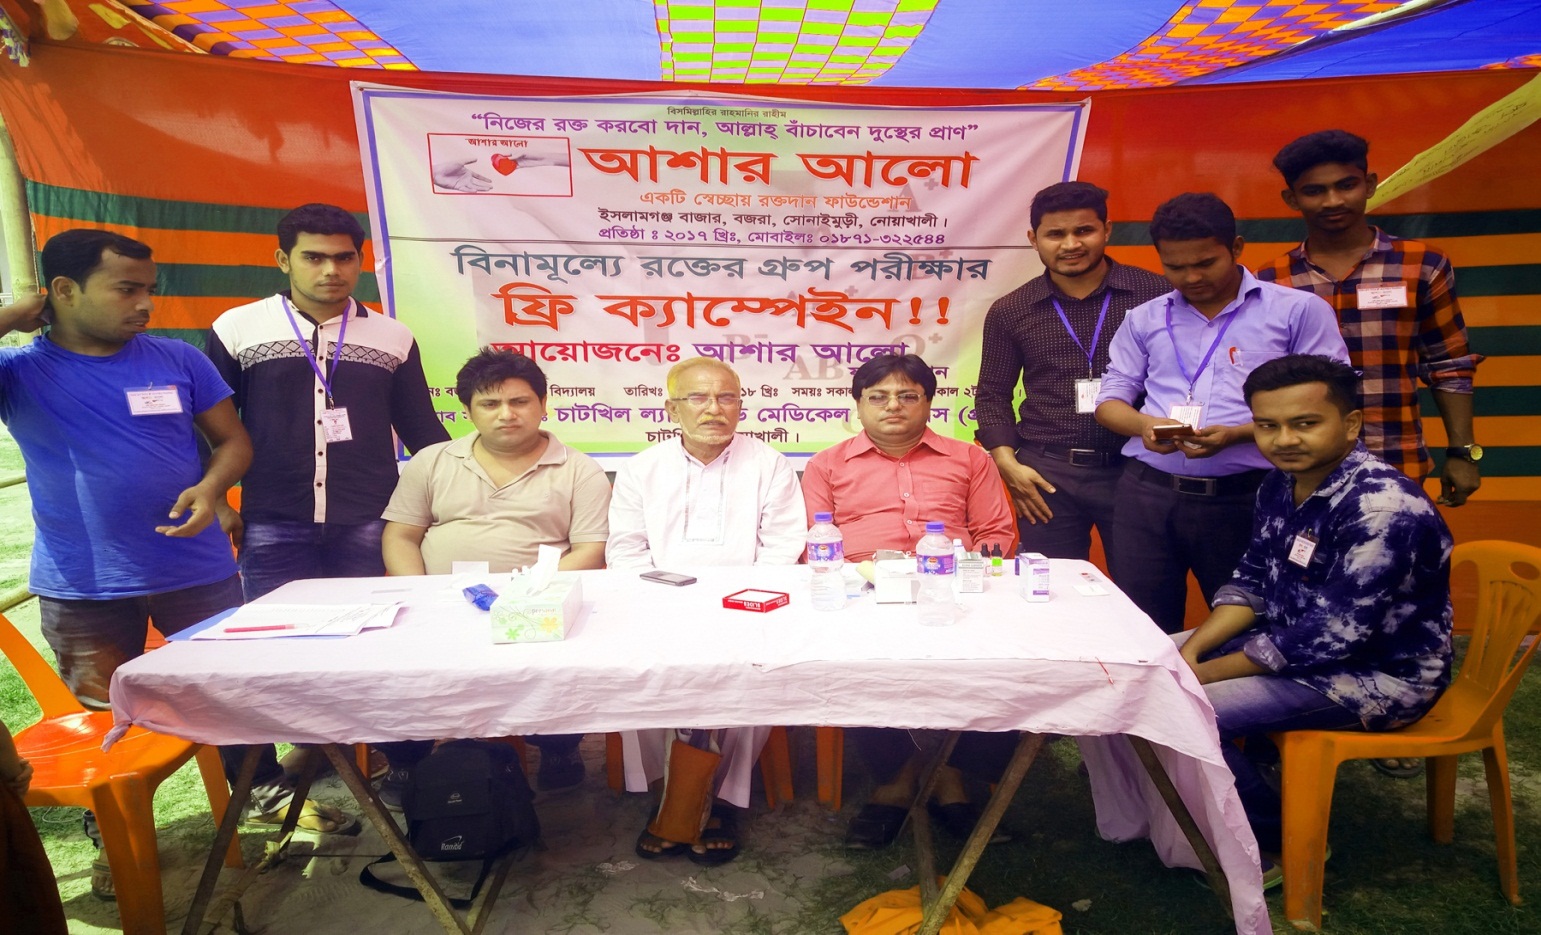 In the picture- Chairman of Begamganj-Sonaimuri Shikkha O Sastha Unnayan Foundation and Begumganj Technical and Computer Institute Principal Gias Uddin Mithu attended free blood group test campaign organized by Ashar Alo foundation.